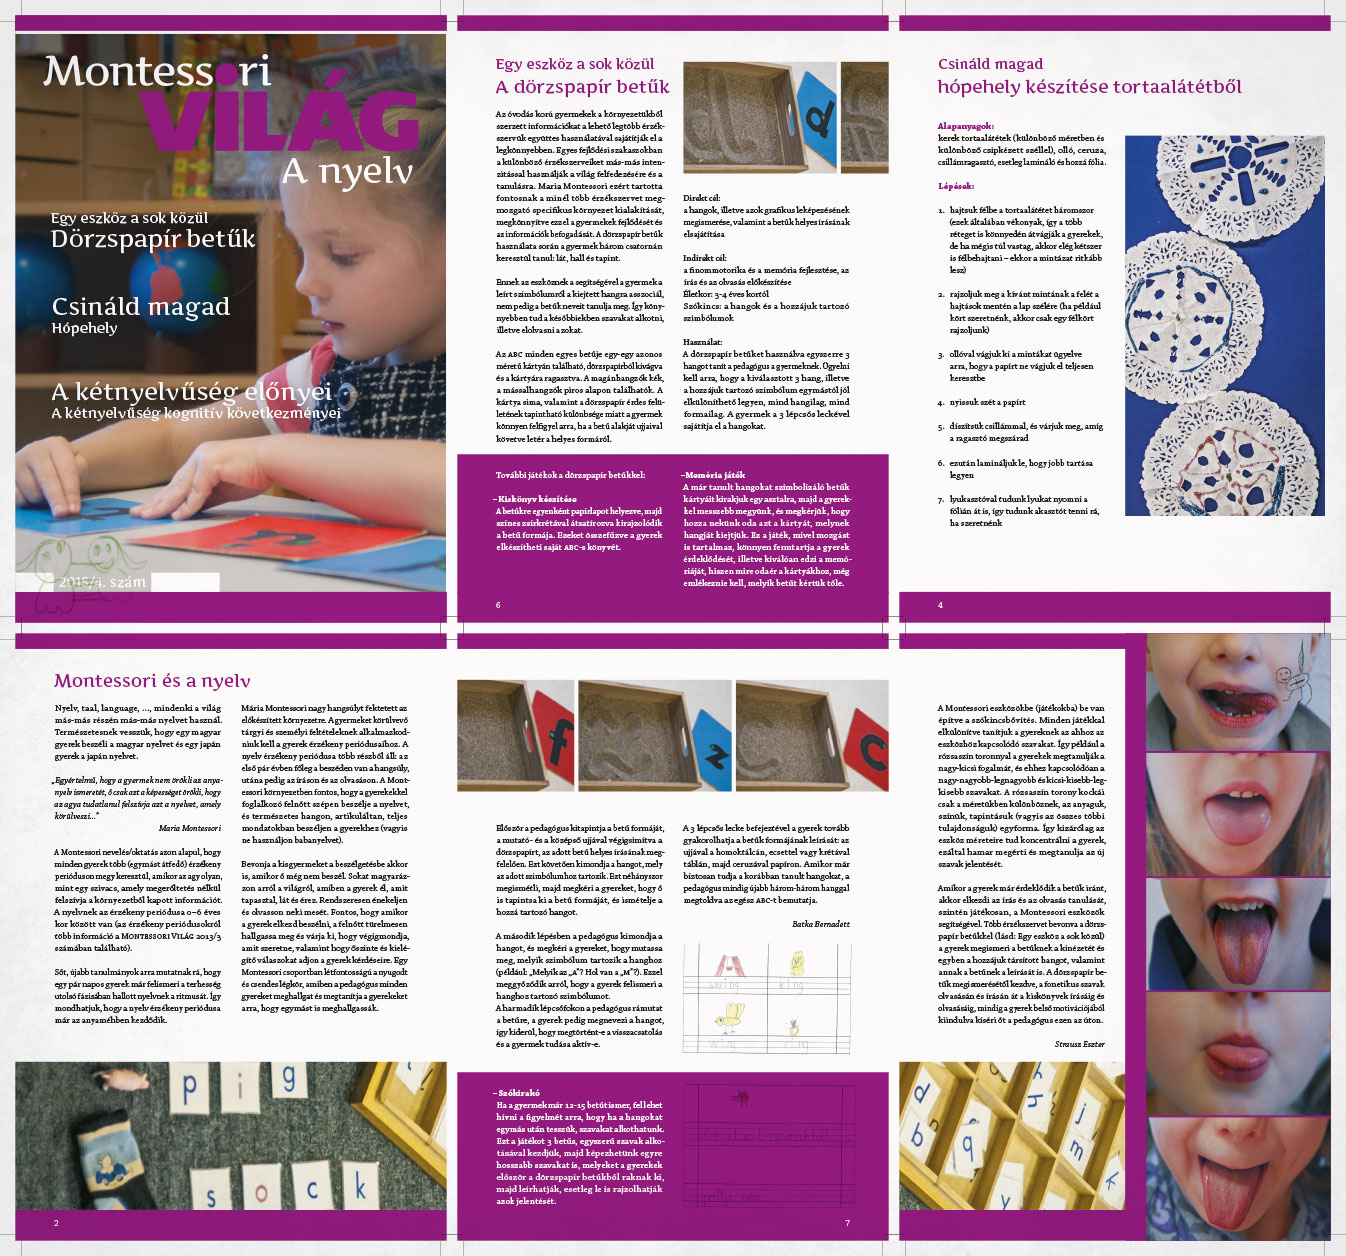 magazine Montessori World #4 cover with a little girl writing and some sample pages